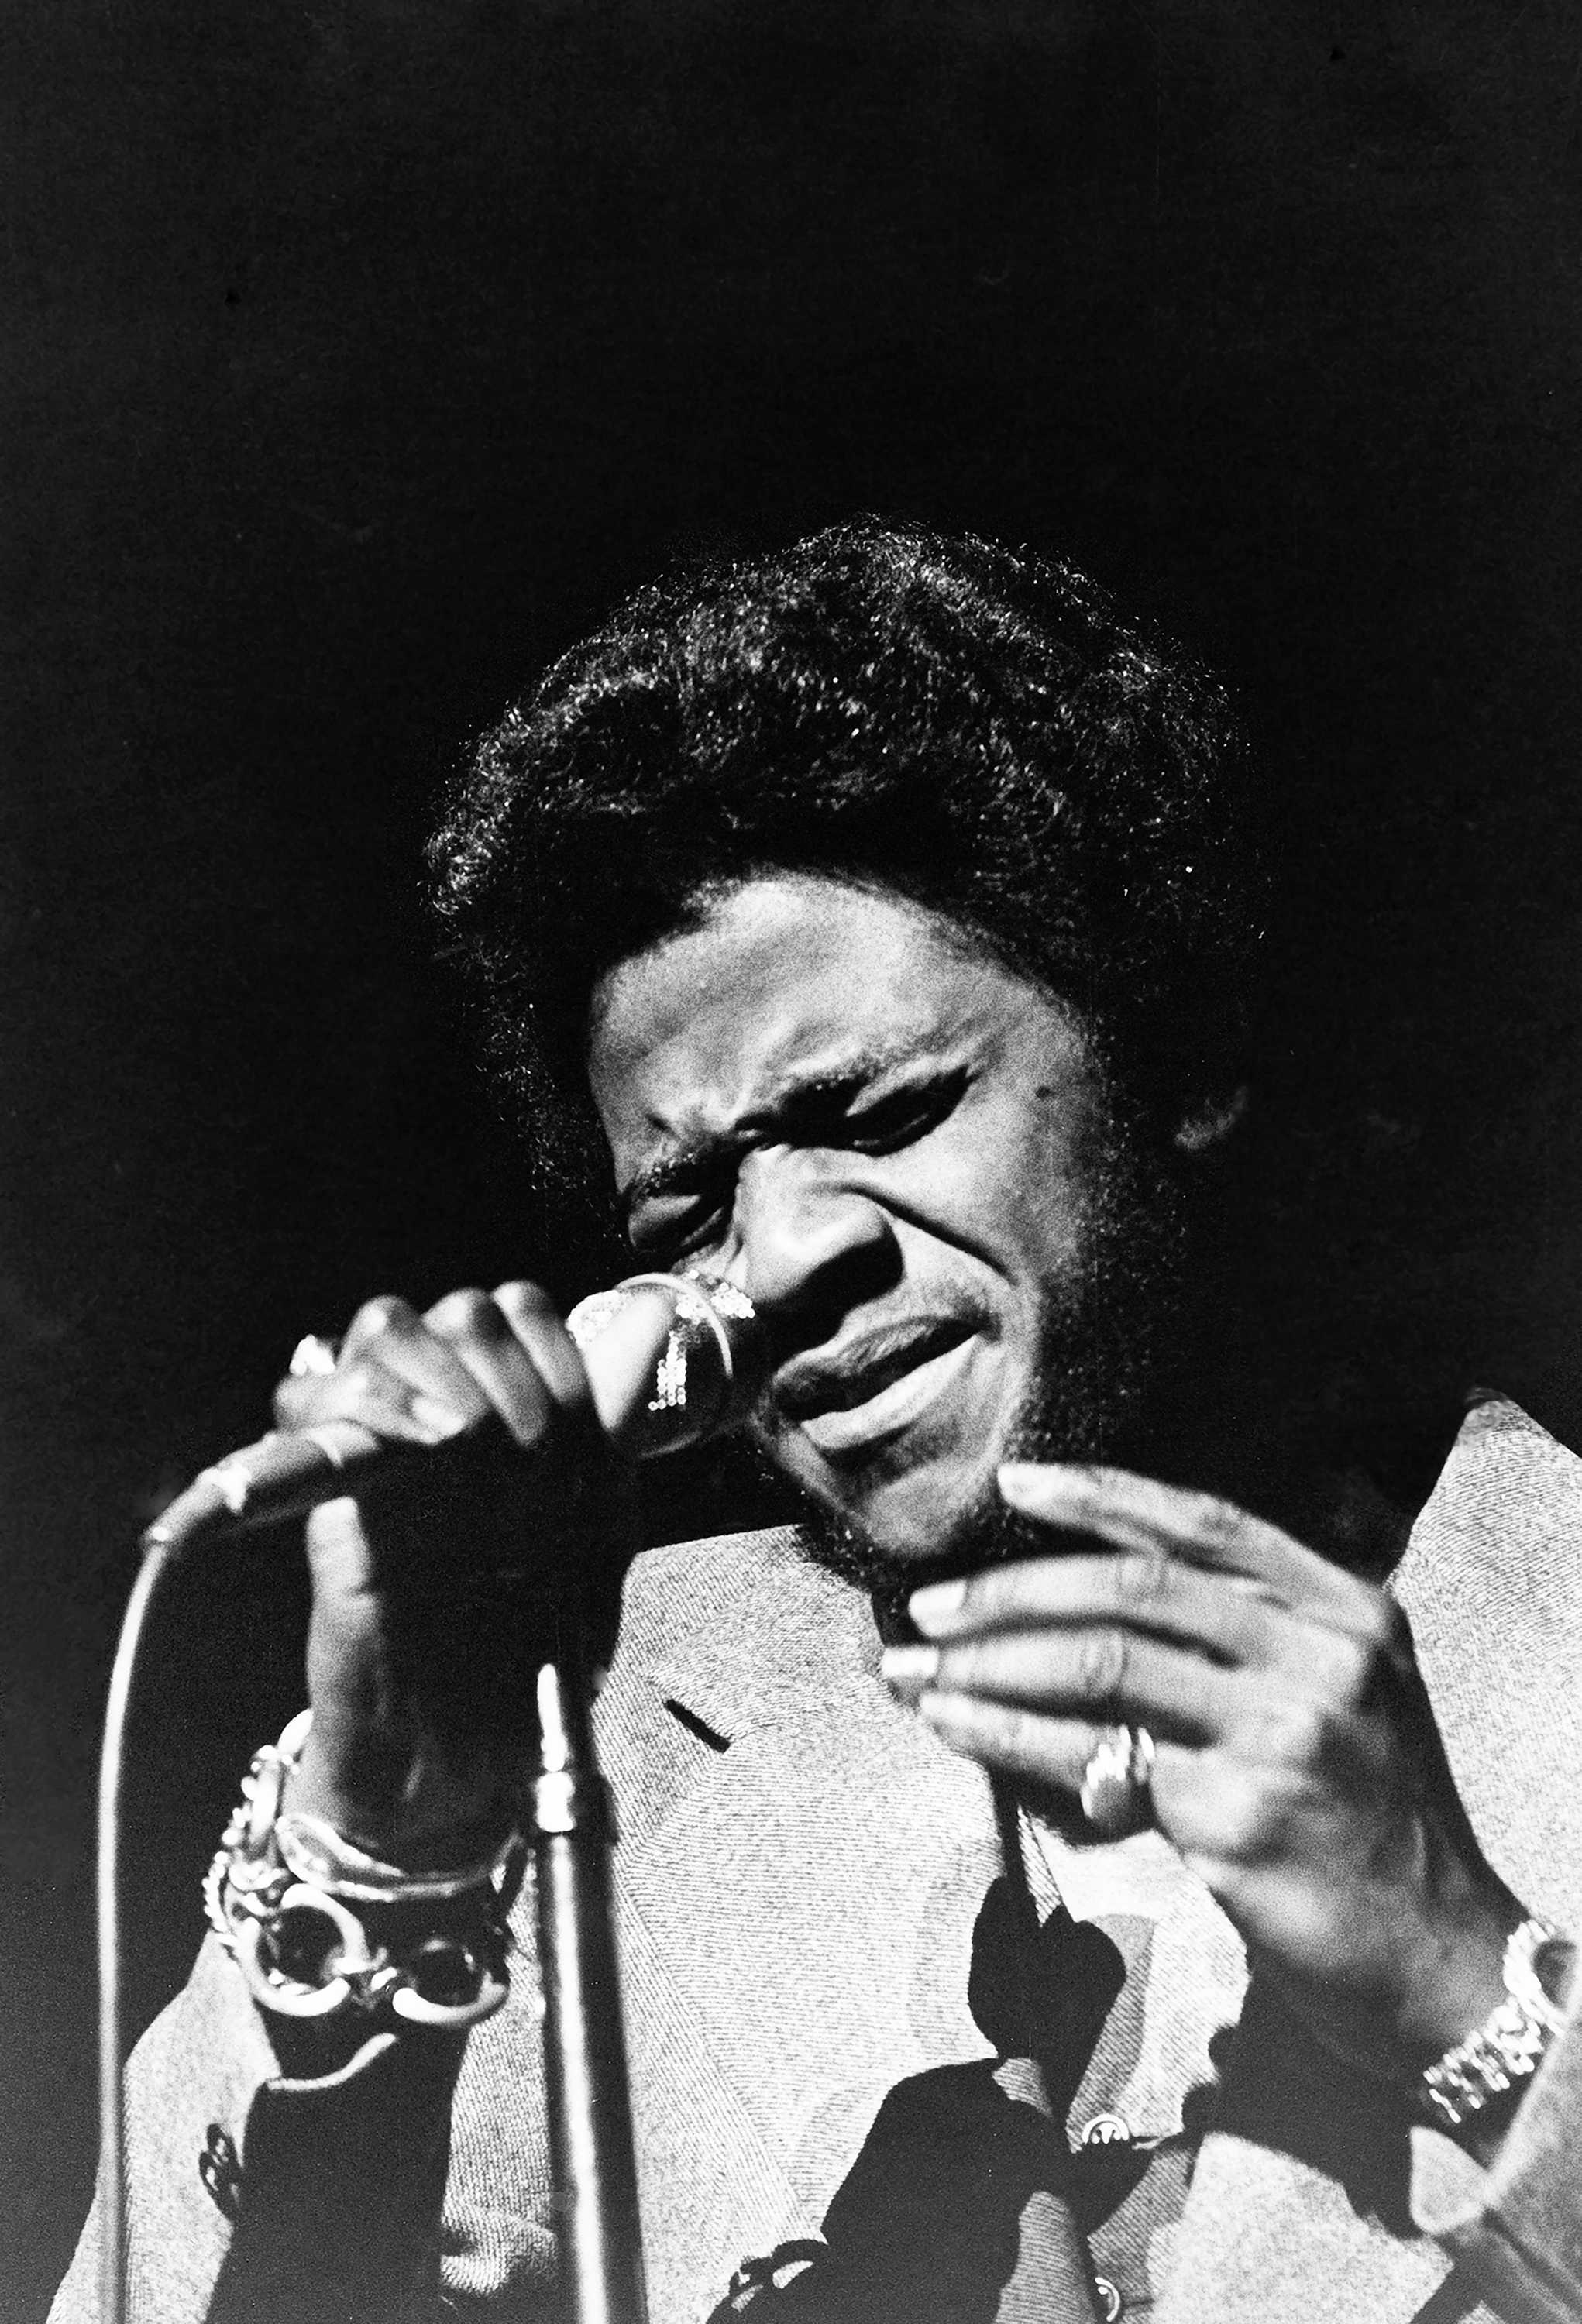 Photograph of Al Green with a microphone in his hand